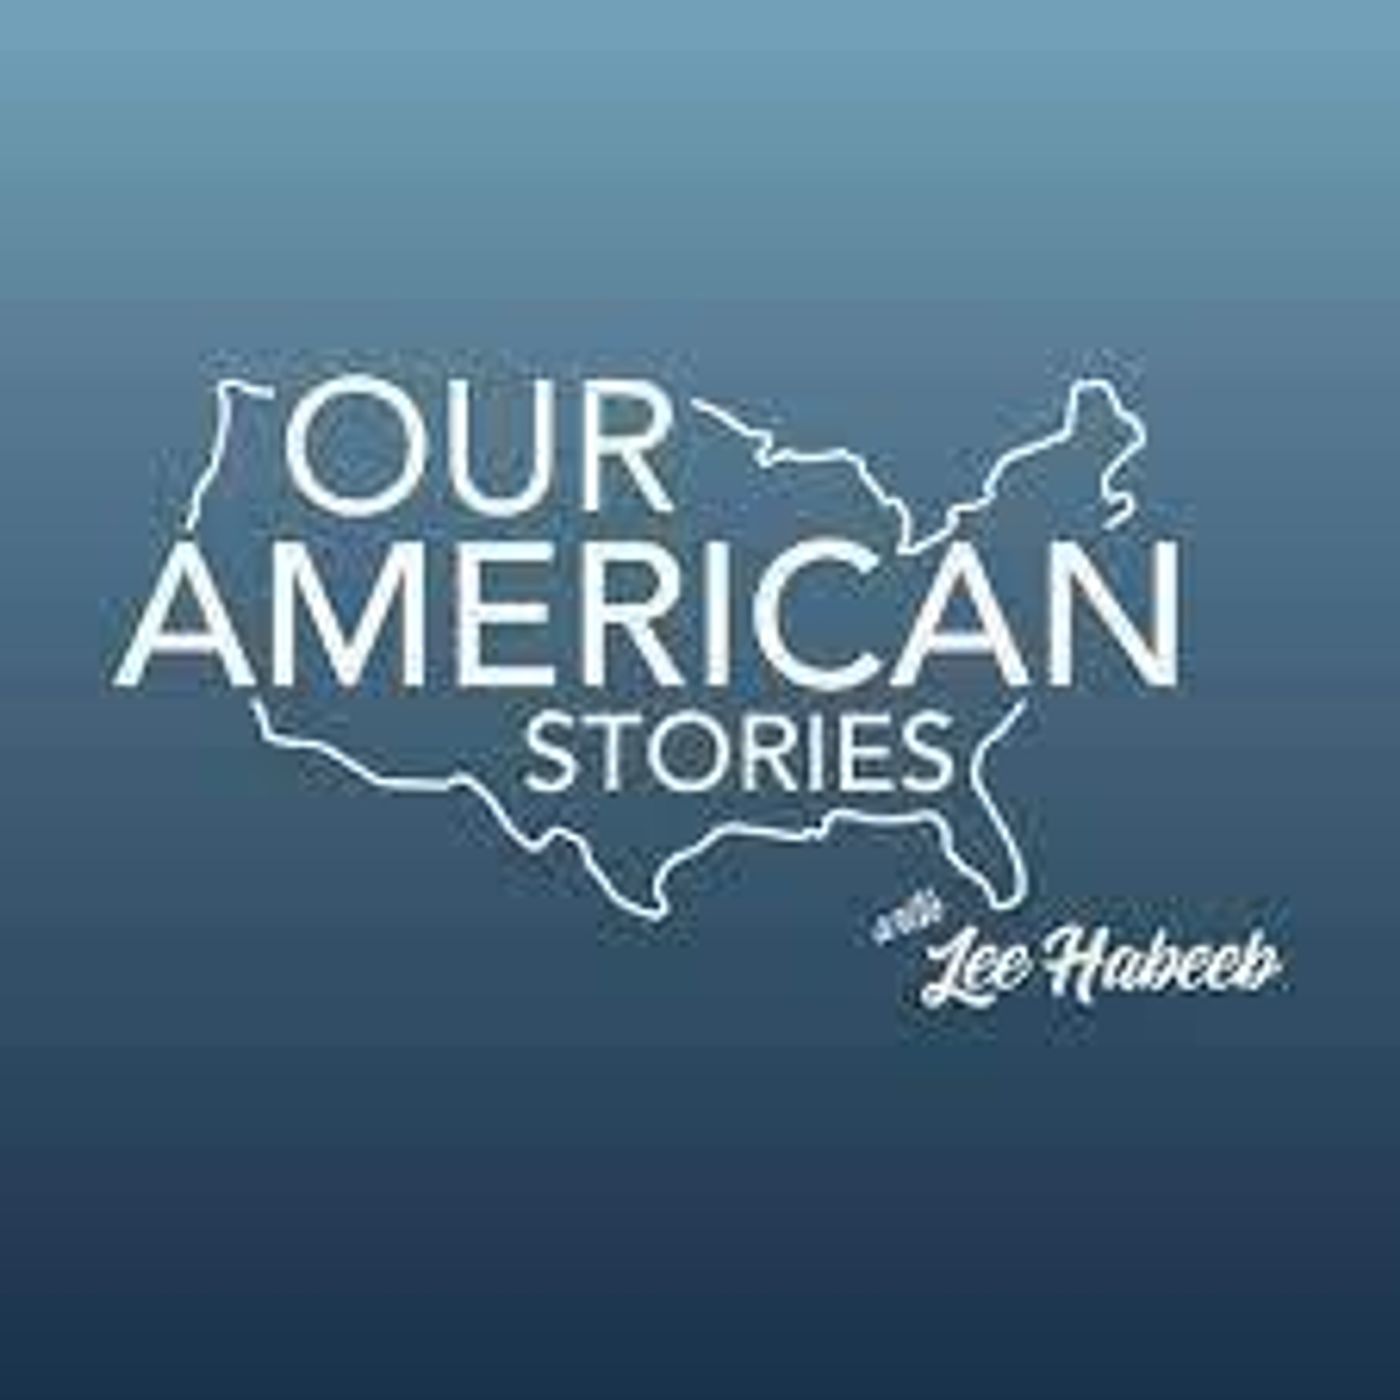 47: Steve Snyder Tells the SHOT DOWN Story on Our American Stories